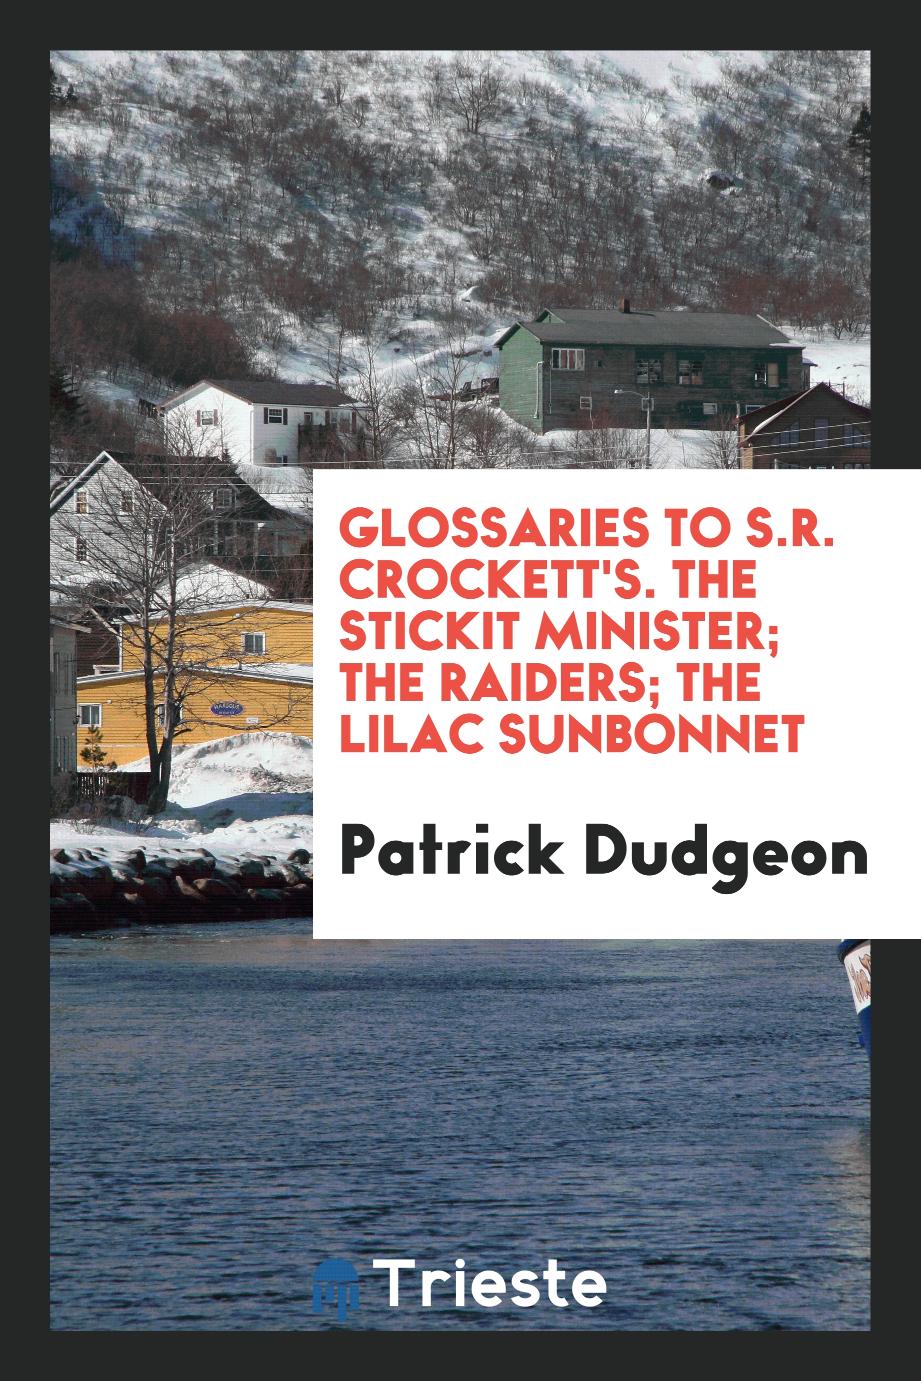 Glossaries to S.R. Crockett's. The Stickit Minister; The Raiders; The Lilac Sunbonnet